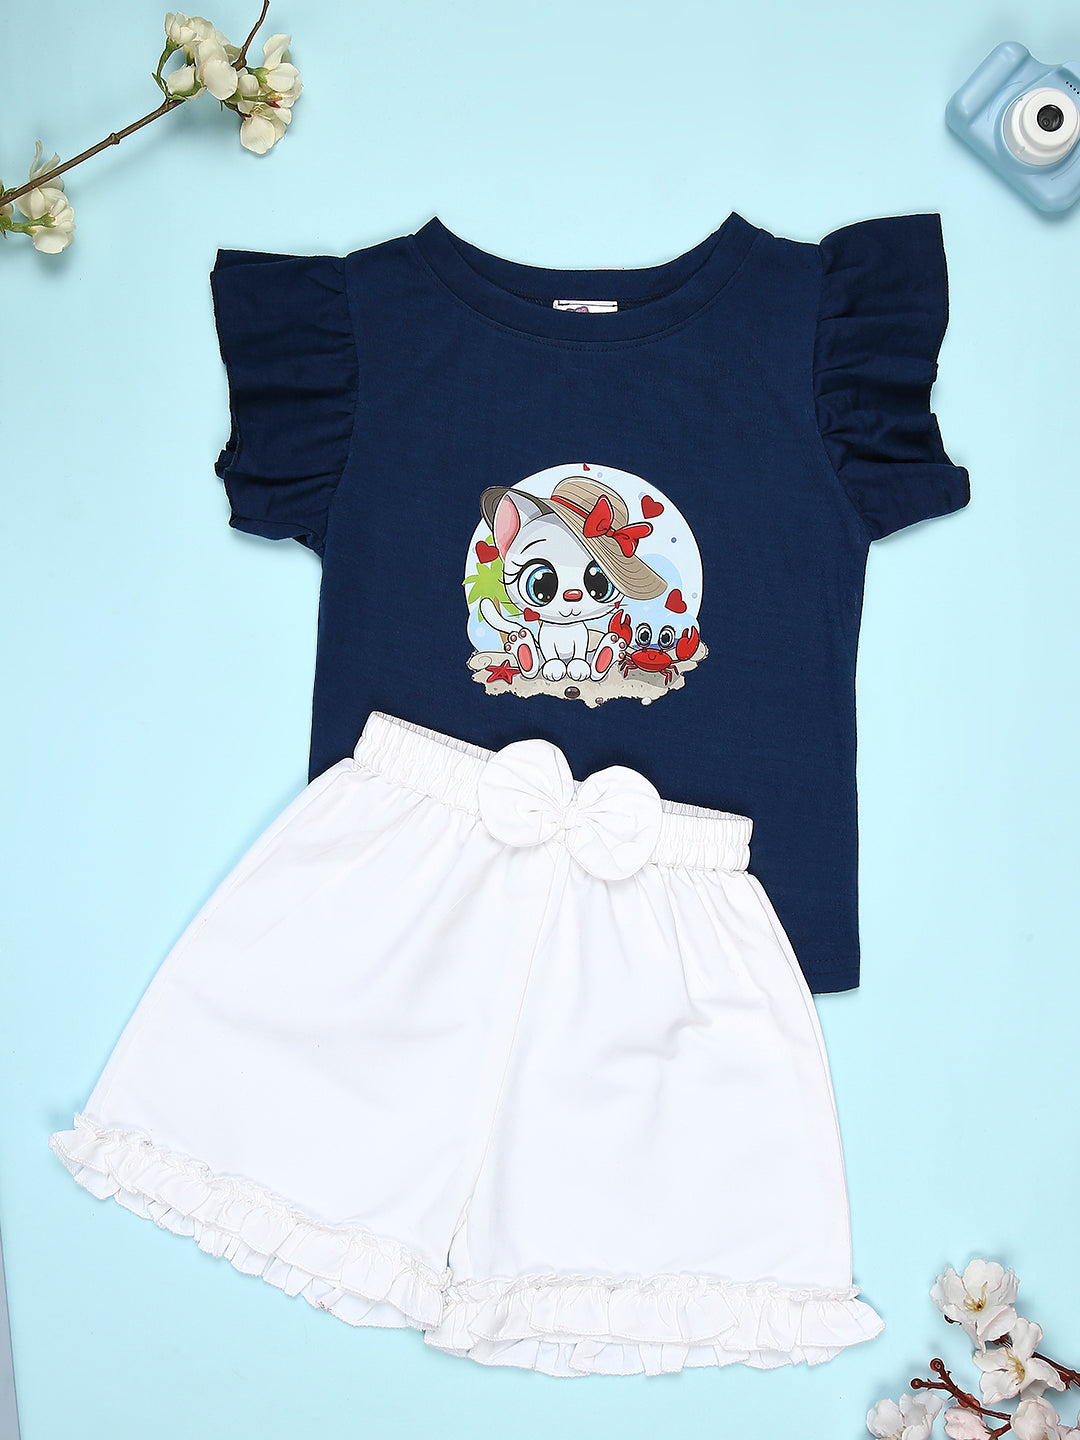 Cutiekins Girls Graphic Print T-Shirt With Solid Embellished Bow Short -Navy Blue & White